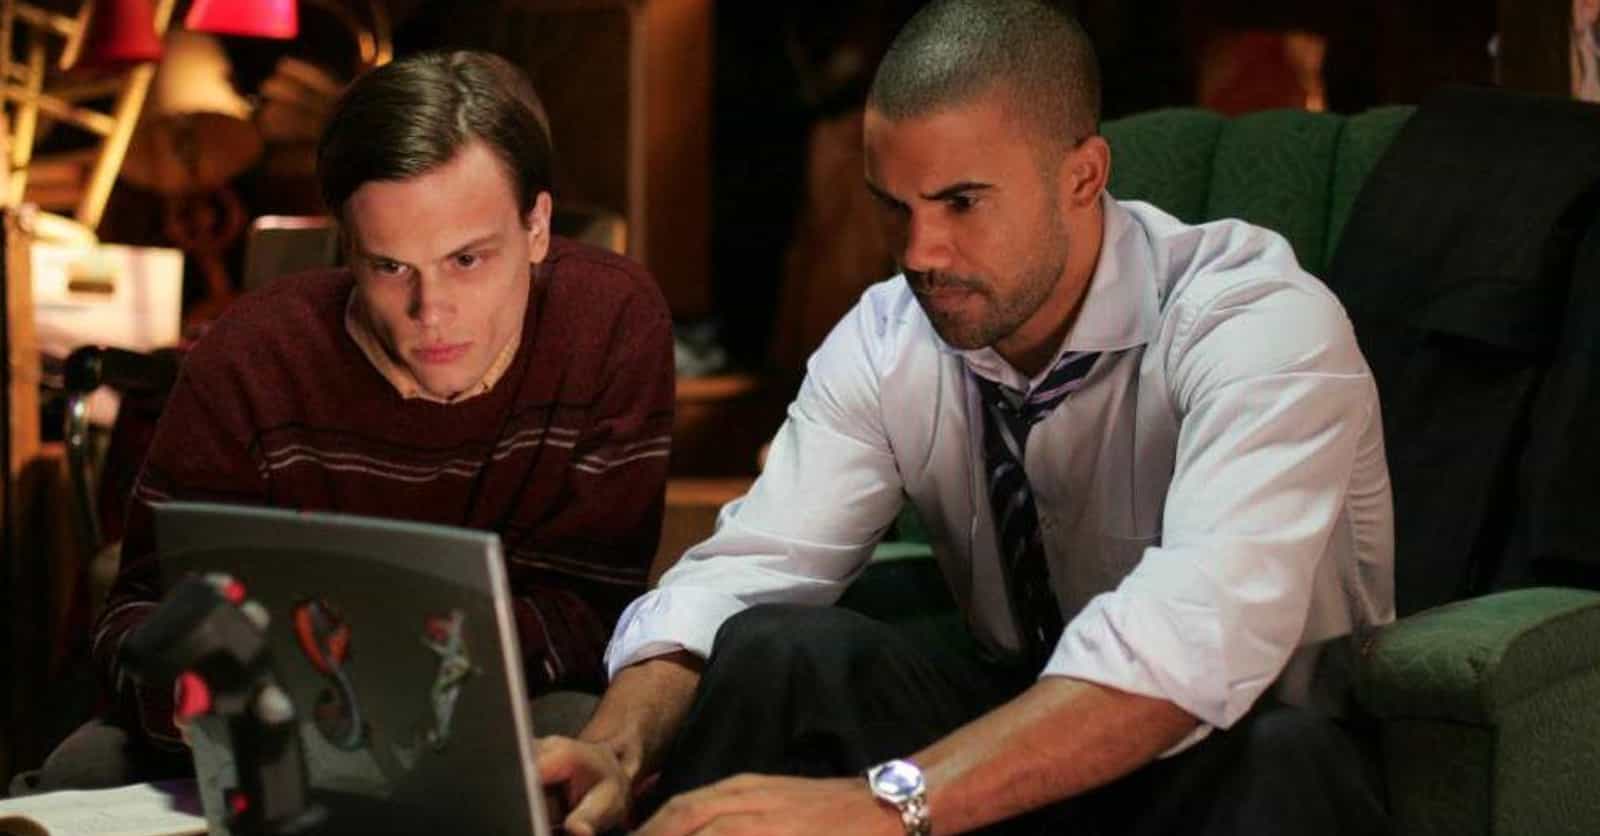 How Accurate Is The Depiction of Behavioral Analysts In 'Criminal Minds?'